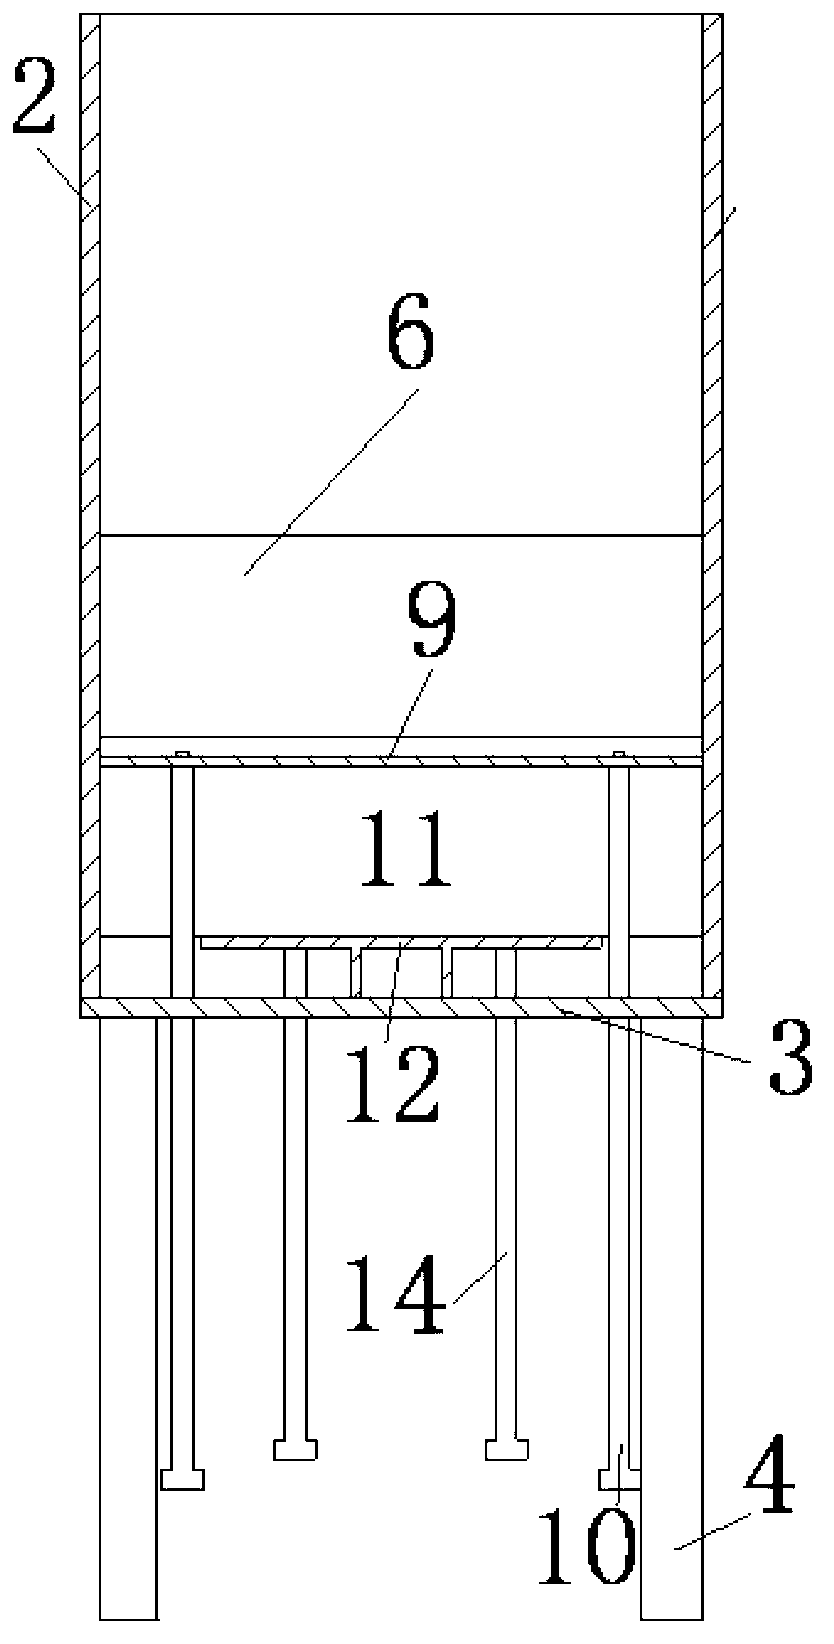 Apparatus and method for soil arch test